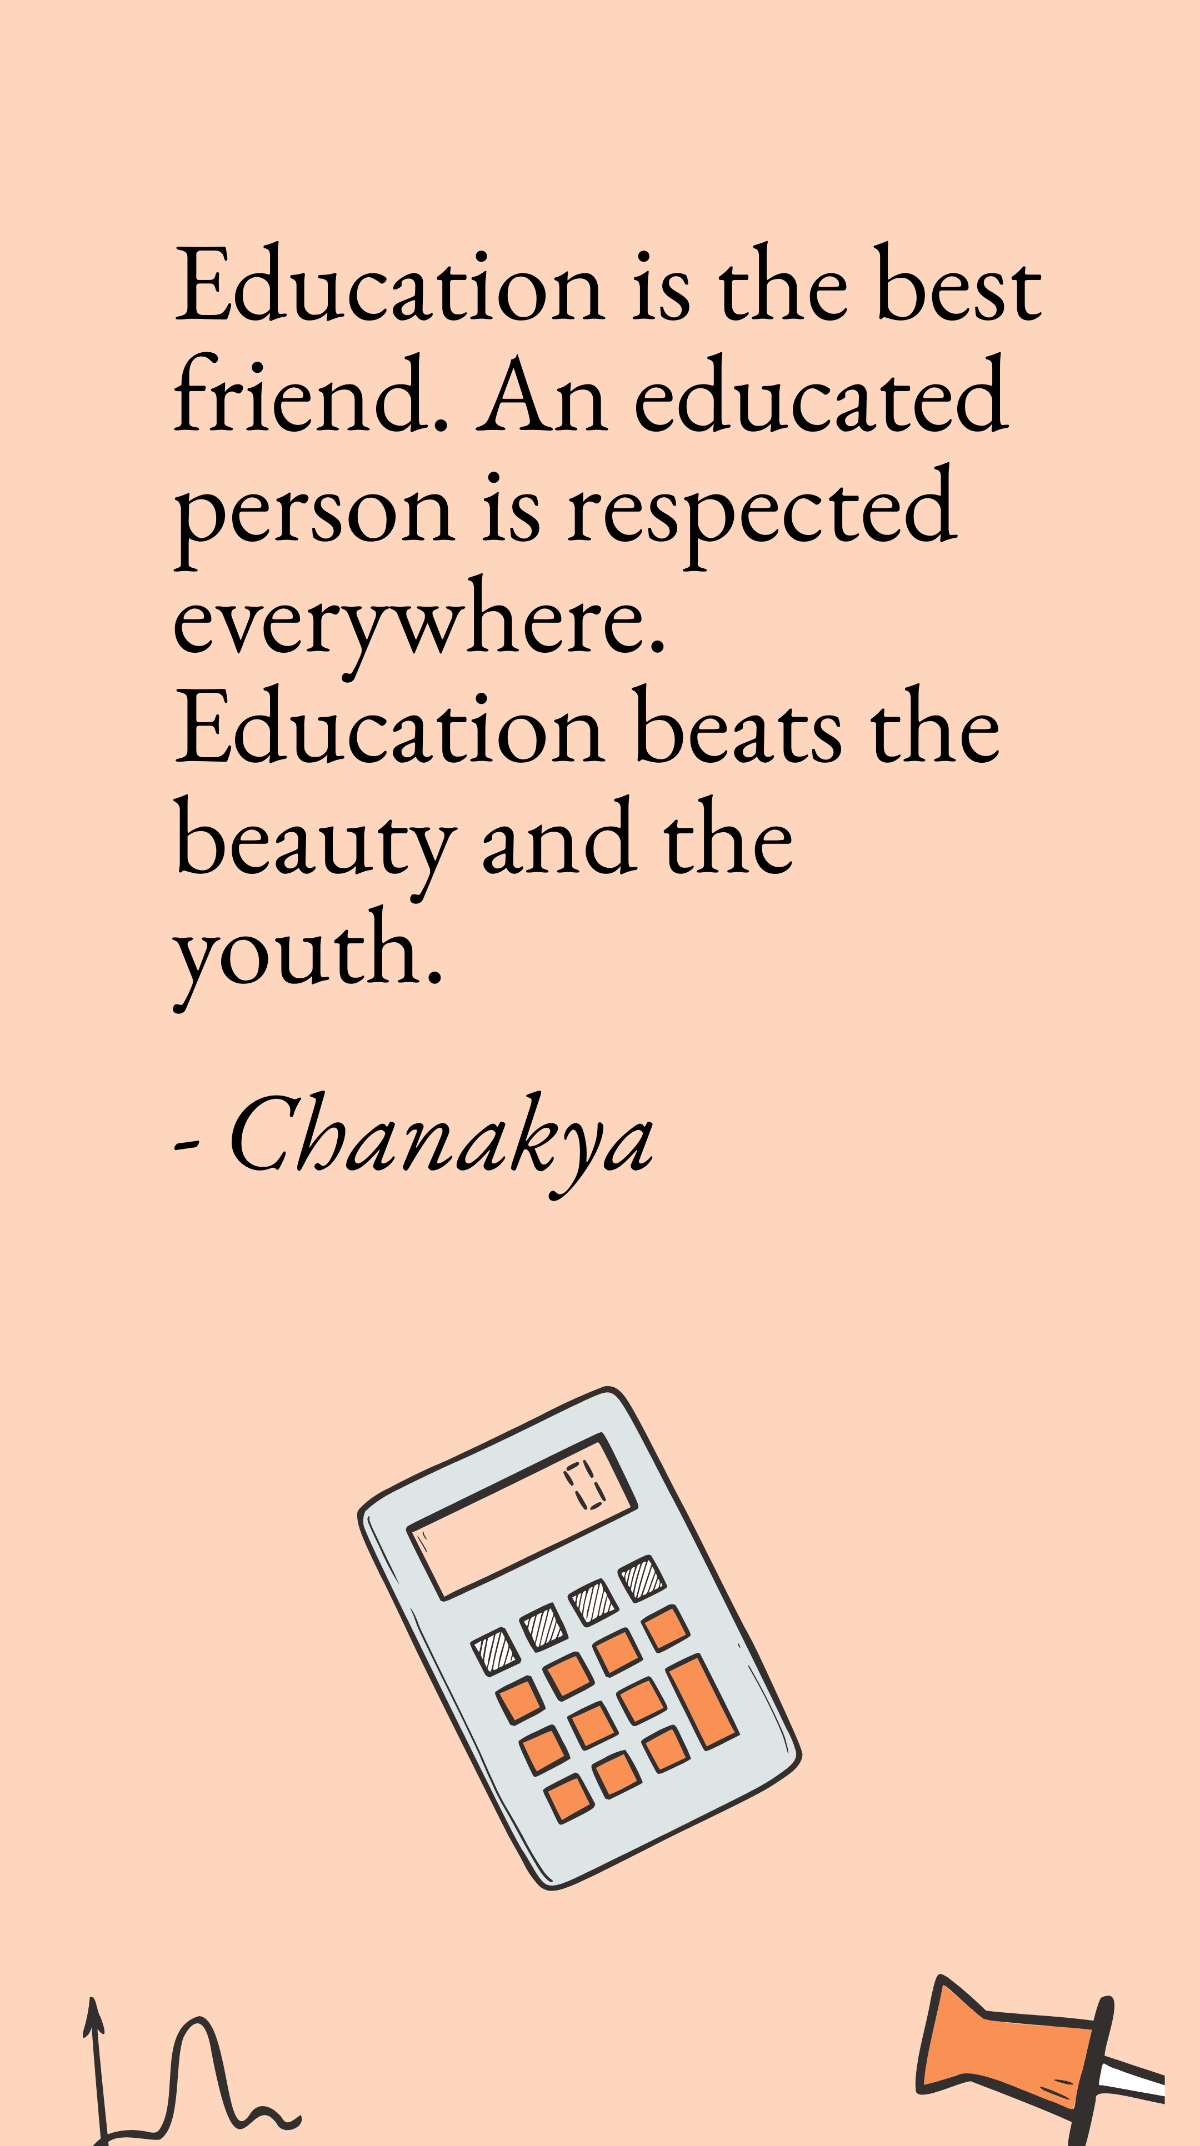 Free Chanakya - Education is the best friend. An educated person is respected everywhere. Education beats the beauty and the youth. Template